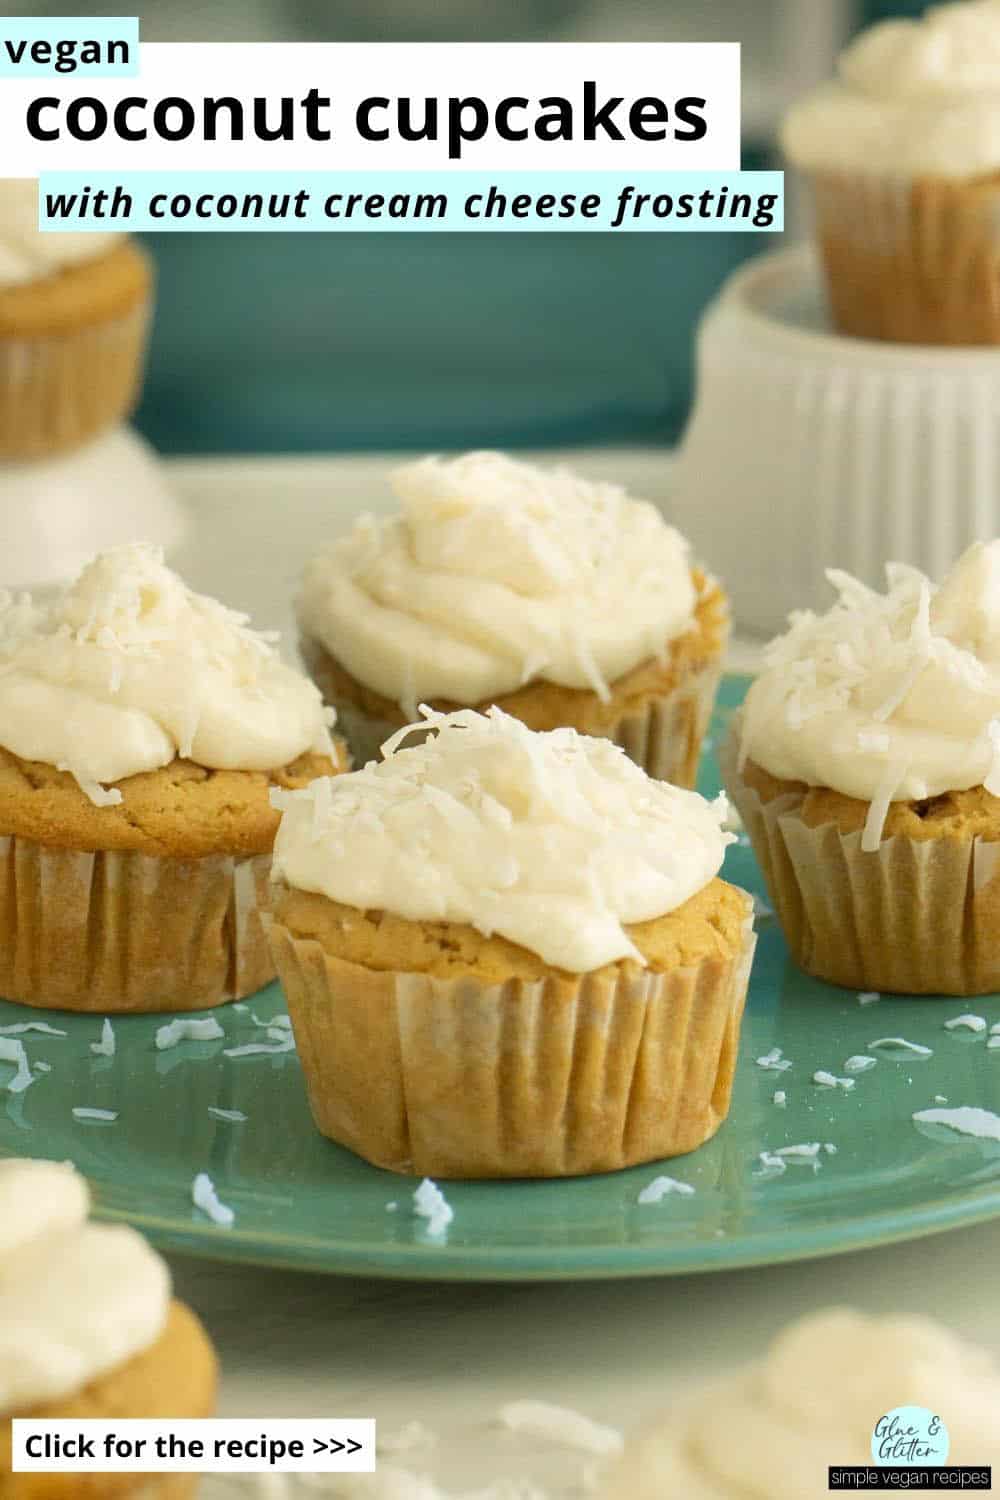 vegan coconut cupcakes with coconut cream cheese frosting on a blue plate, text overlay